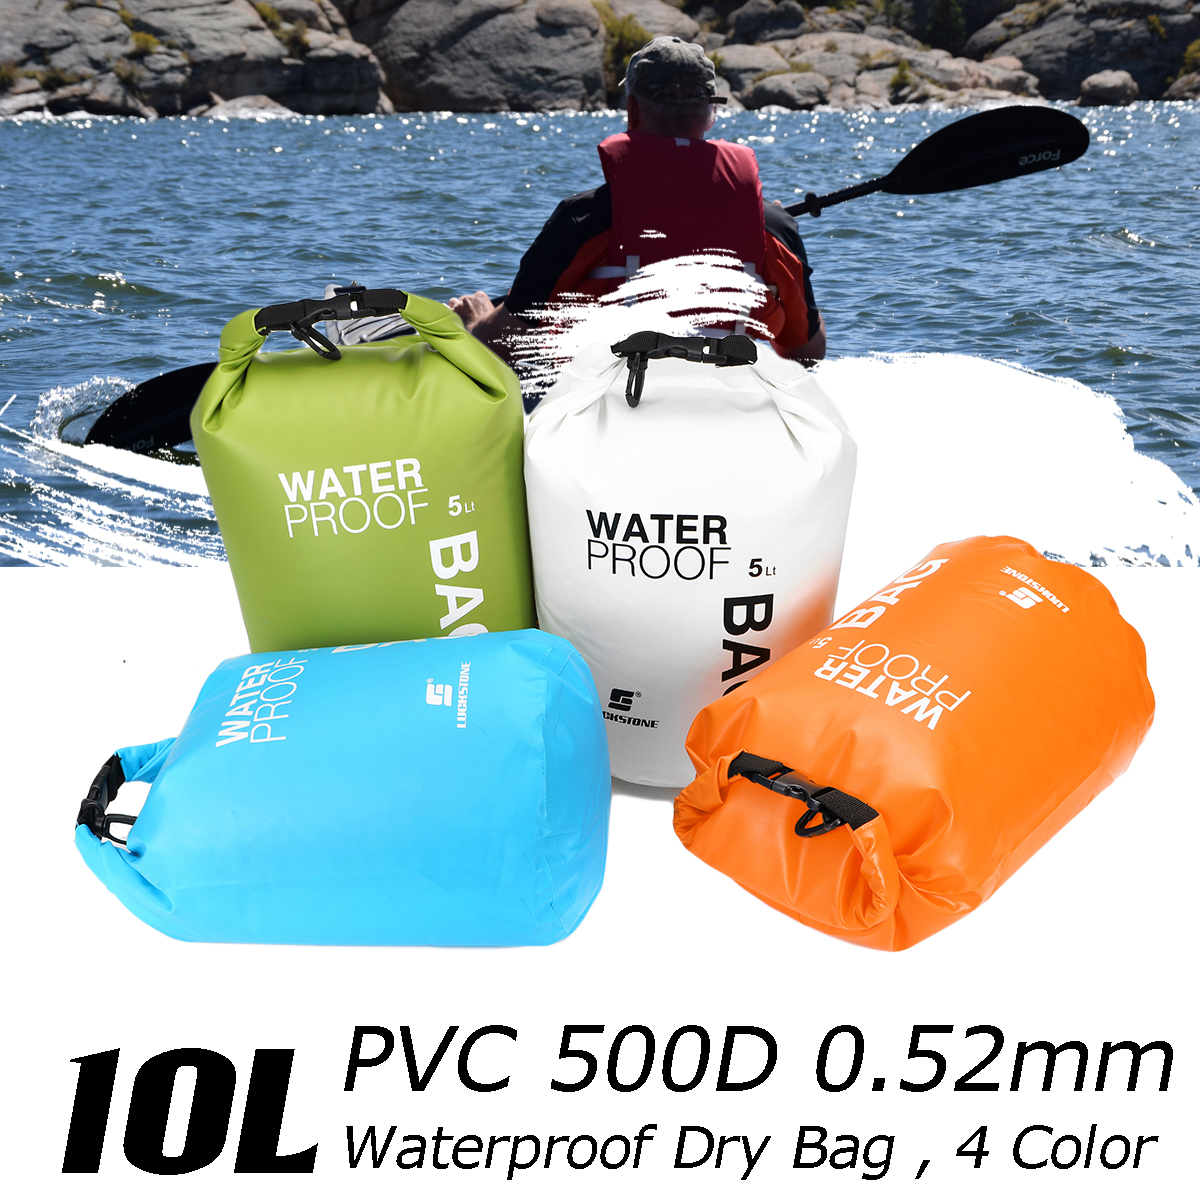 10L-Outdoor-Swimming-Air-Inflation-Floating-Mobile-Phone-Camera-Storage-PVC-Waterproof-Bag-1820807-1